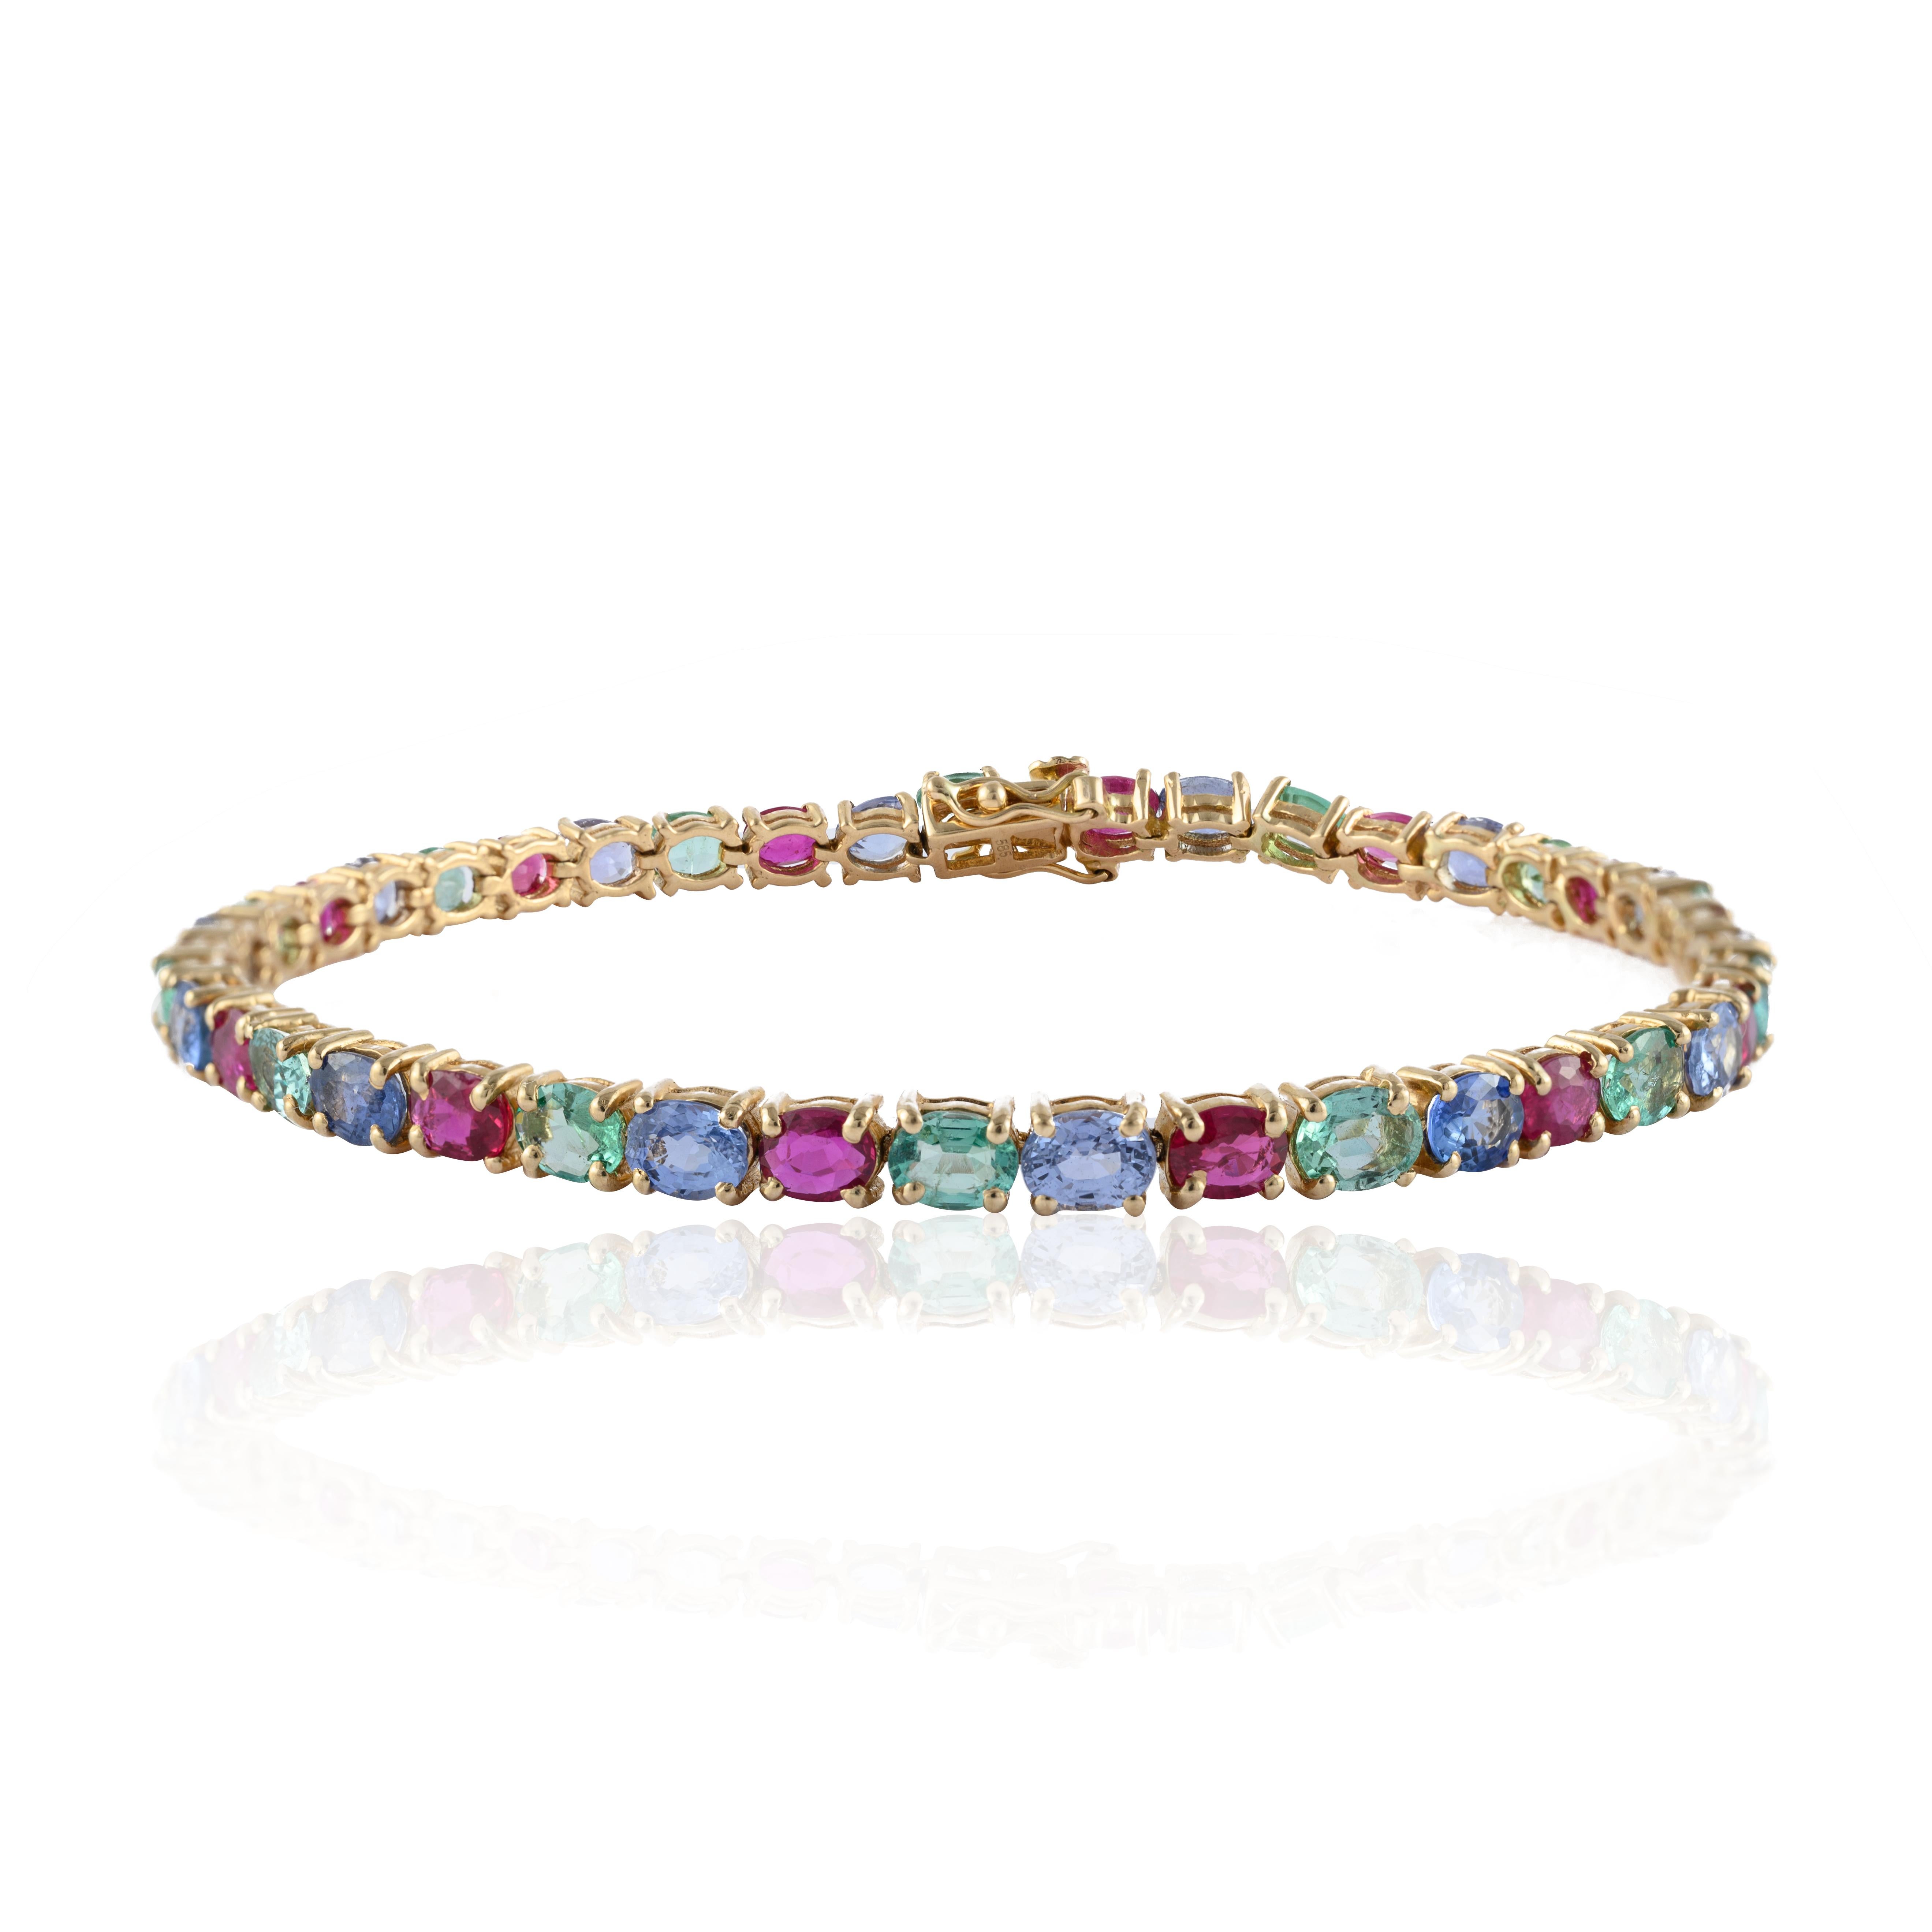 Oval Cut Exquisite 15.25 Carat Emerald, Ruby and Sapphire 14k Yellow Gold Tennis Bracelet For Sale